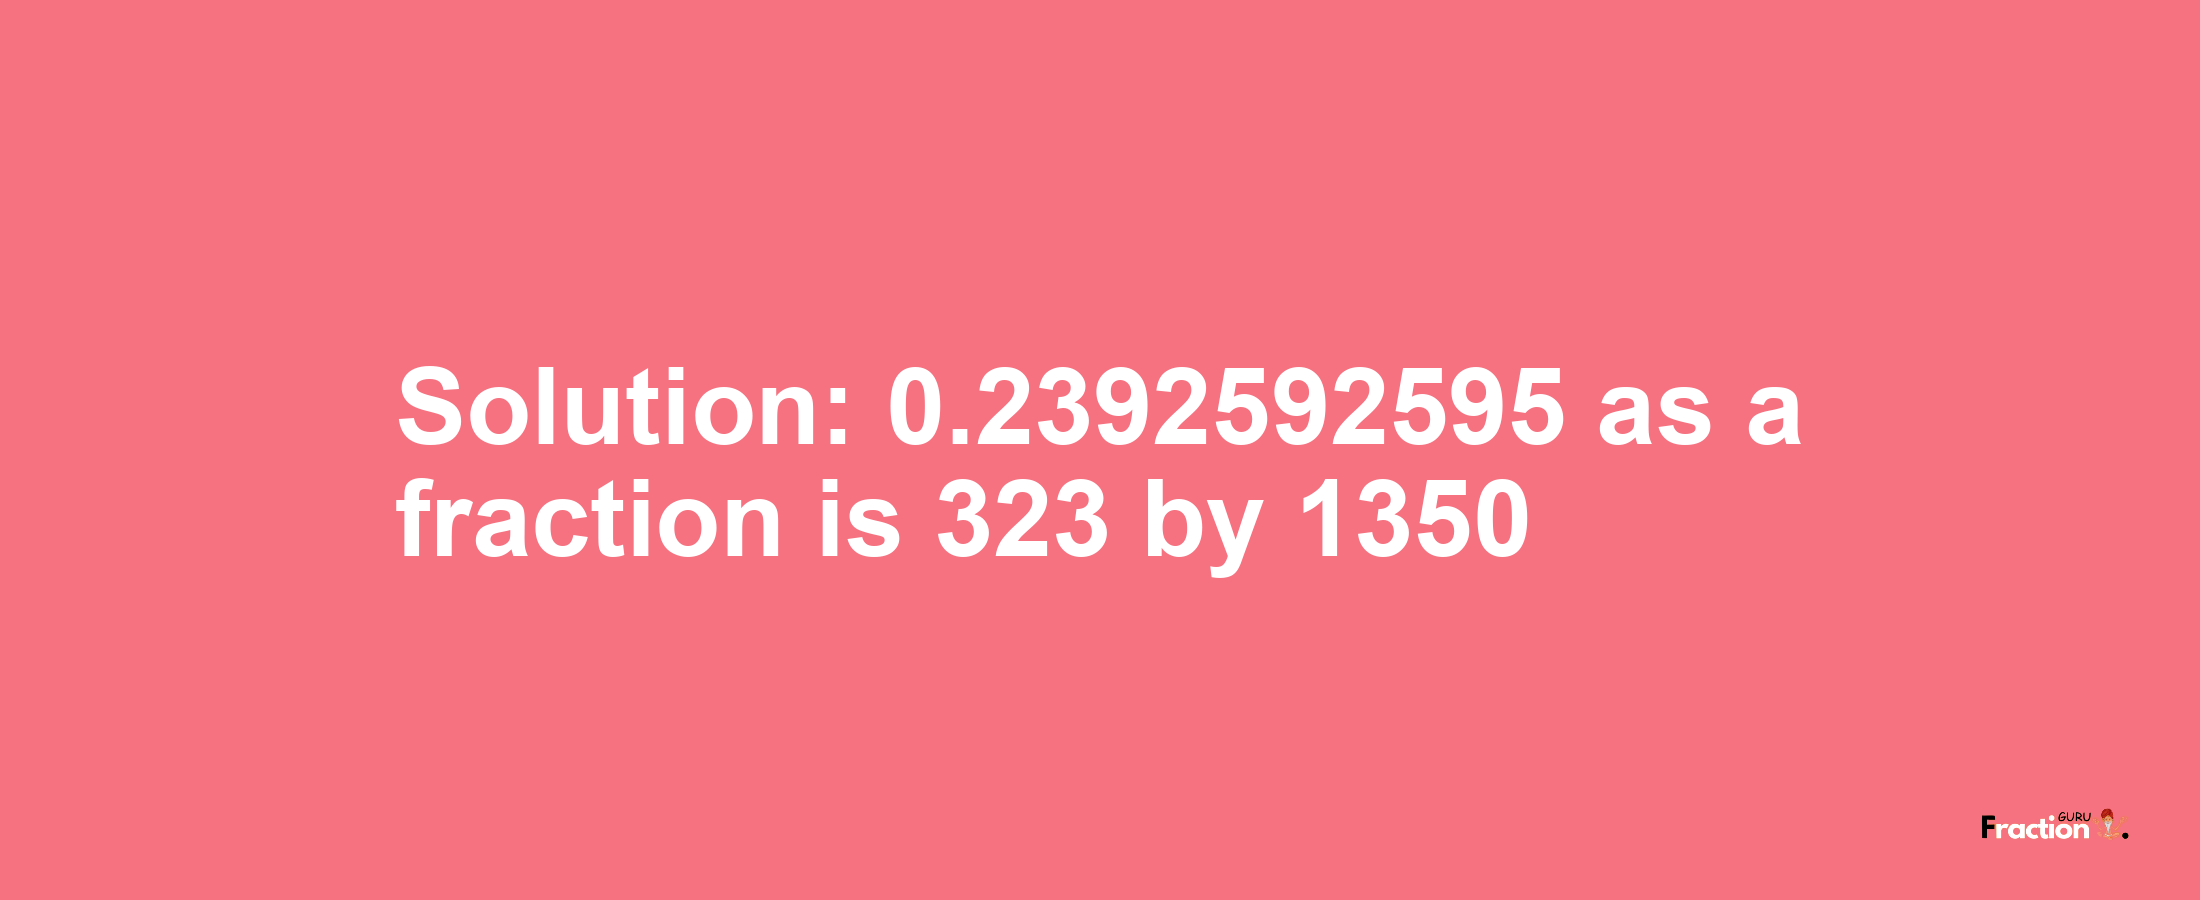 Solution:0.2392592595 as a fraction is 323/1350